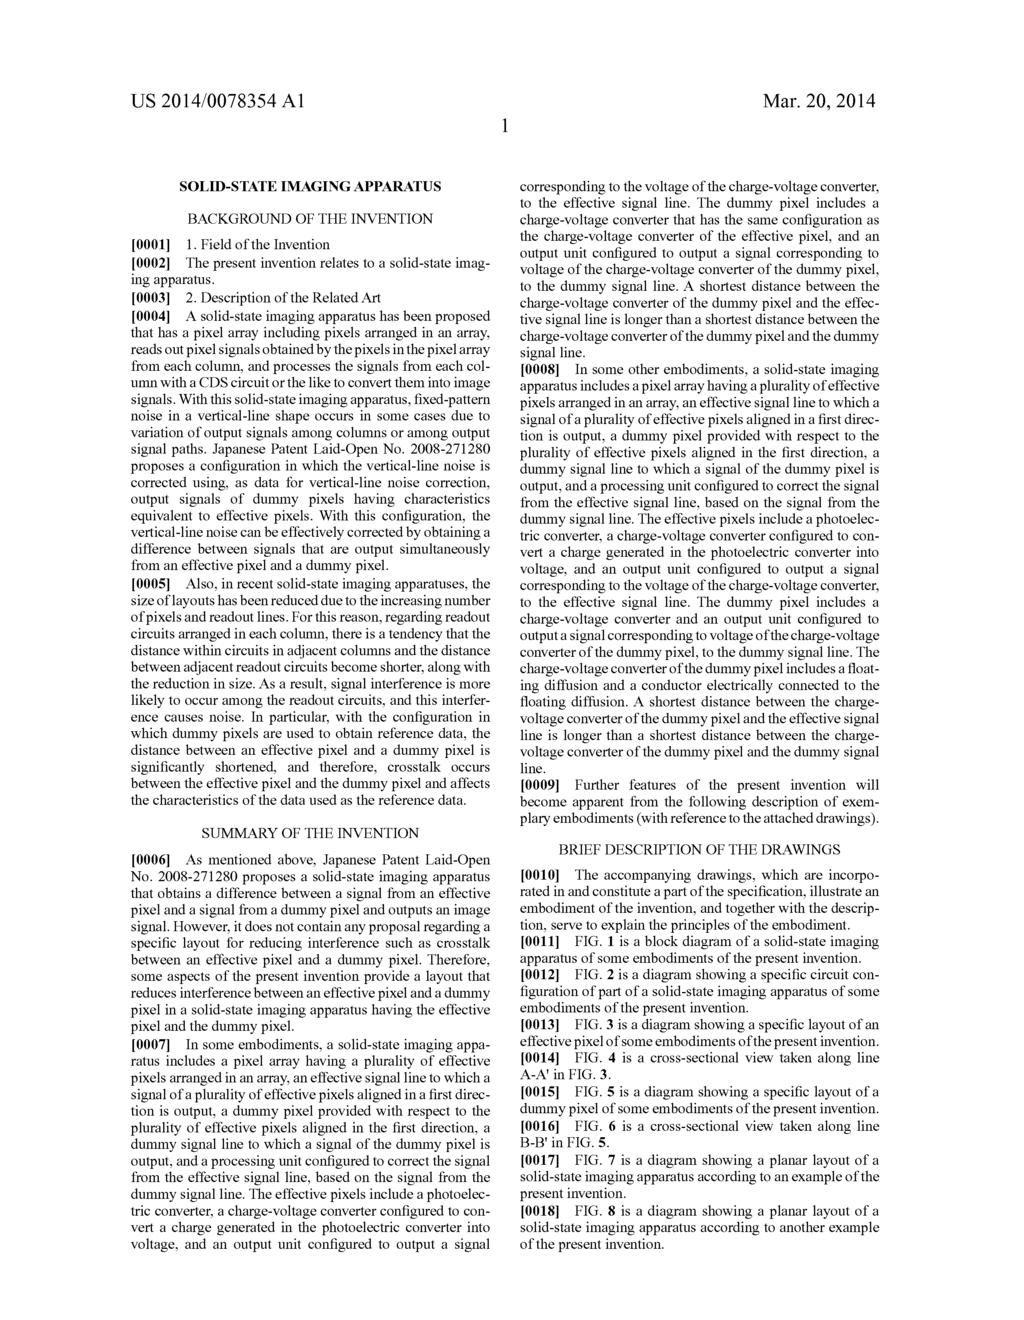 US 2014/0078354 A1 Mar. 20, 2014 SOLD-STATE IMAGINGAPPARATUS BACKGROUND OF THE INVENTION 0001 1. Field of the Invention 0002 The present invention relates to a solid-state imag ing apparatus. 0003 2.